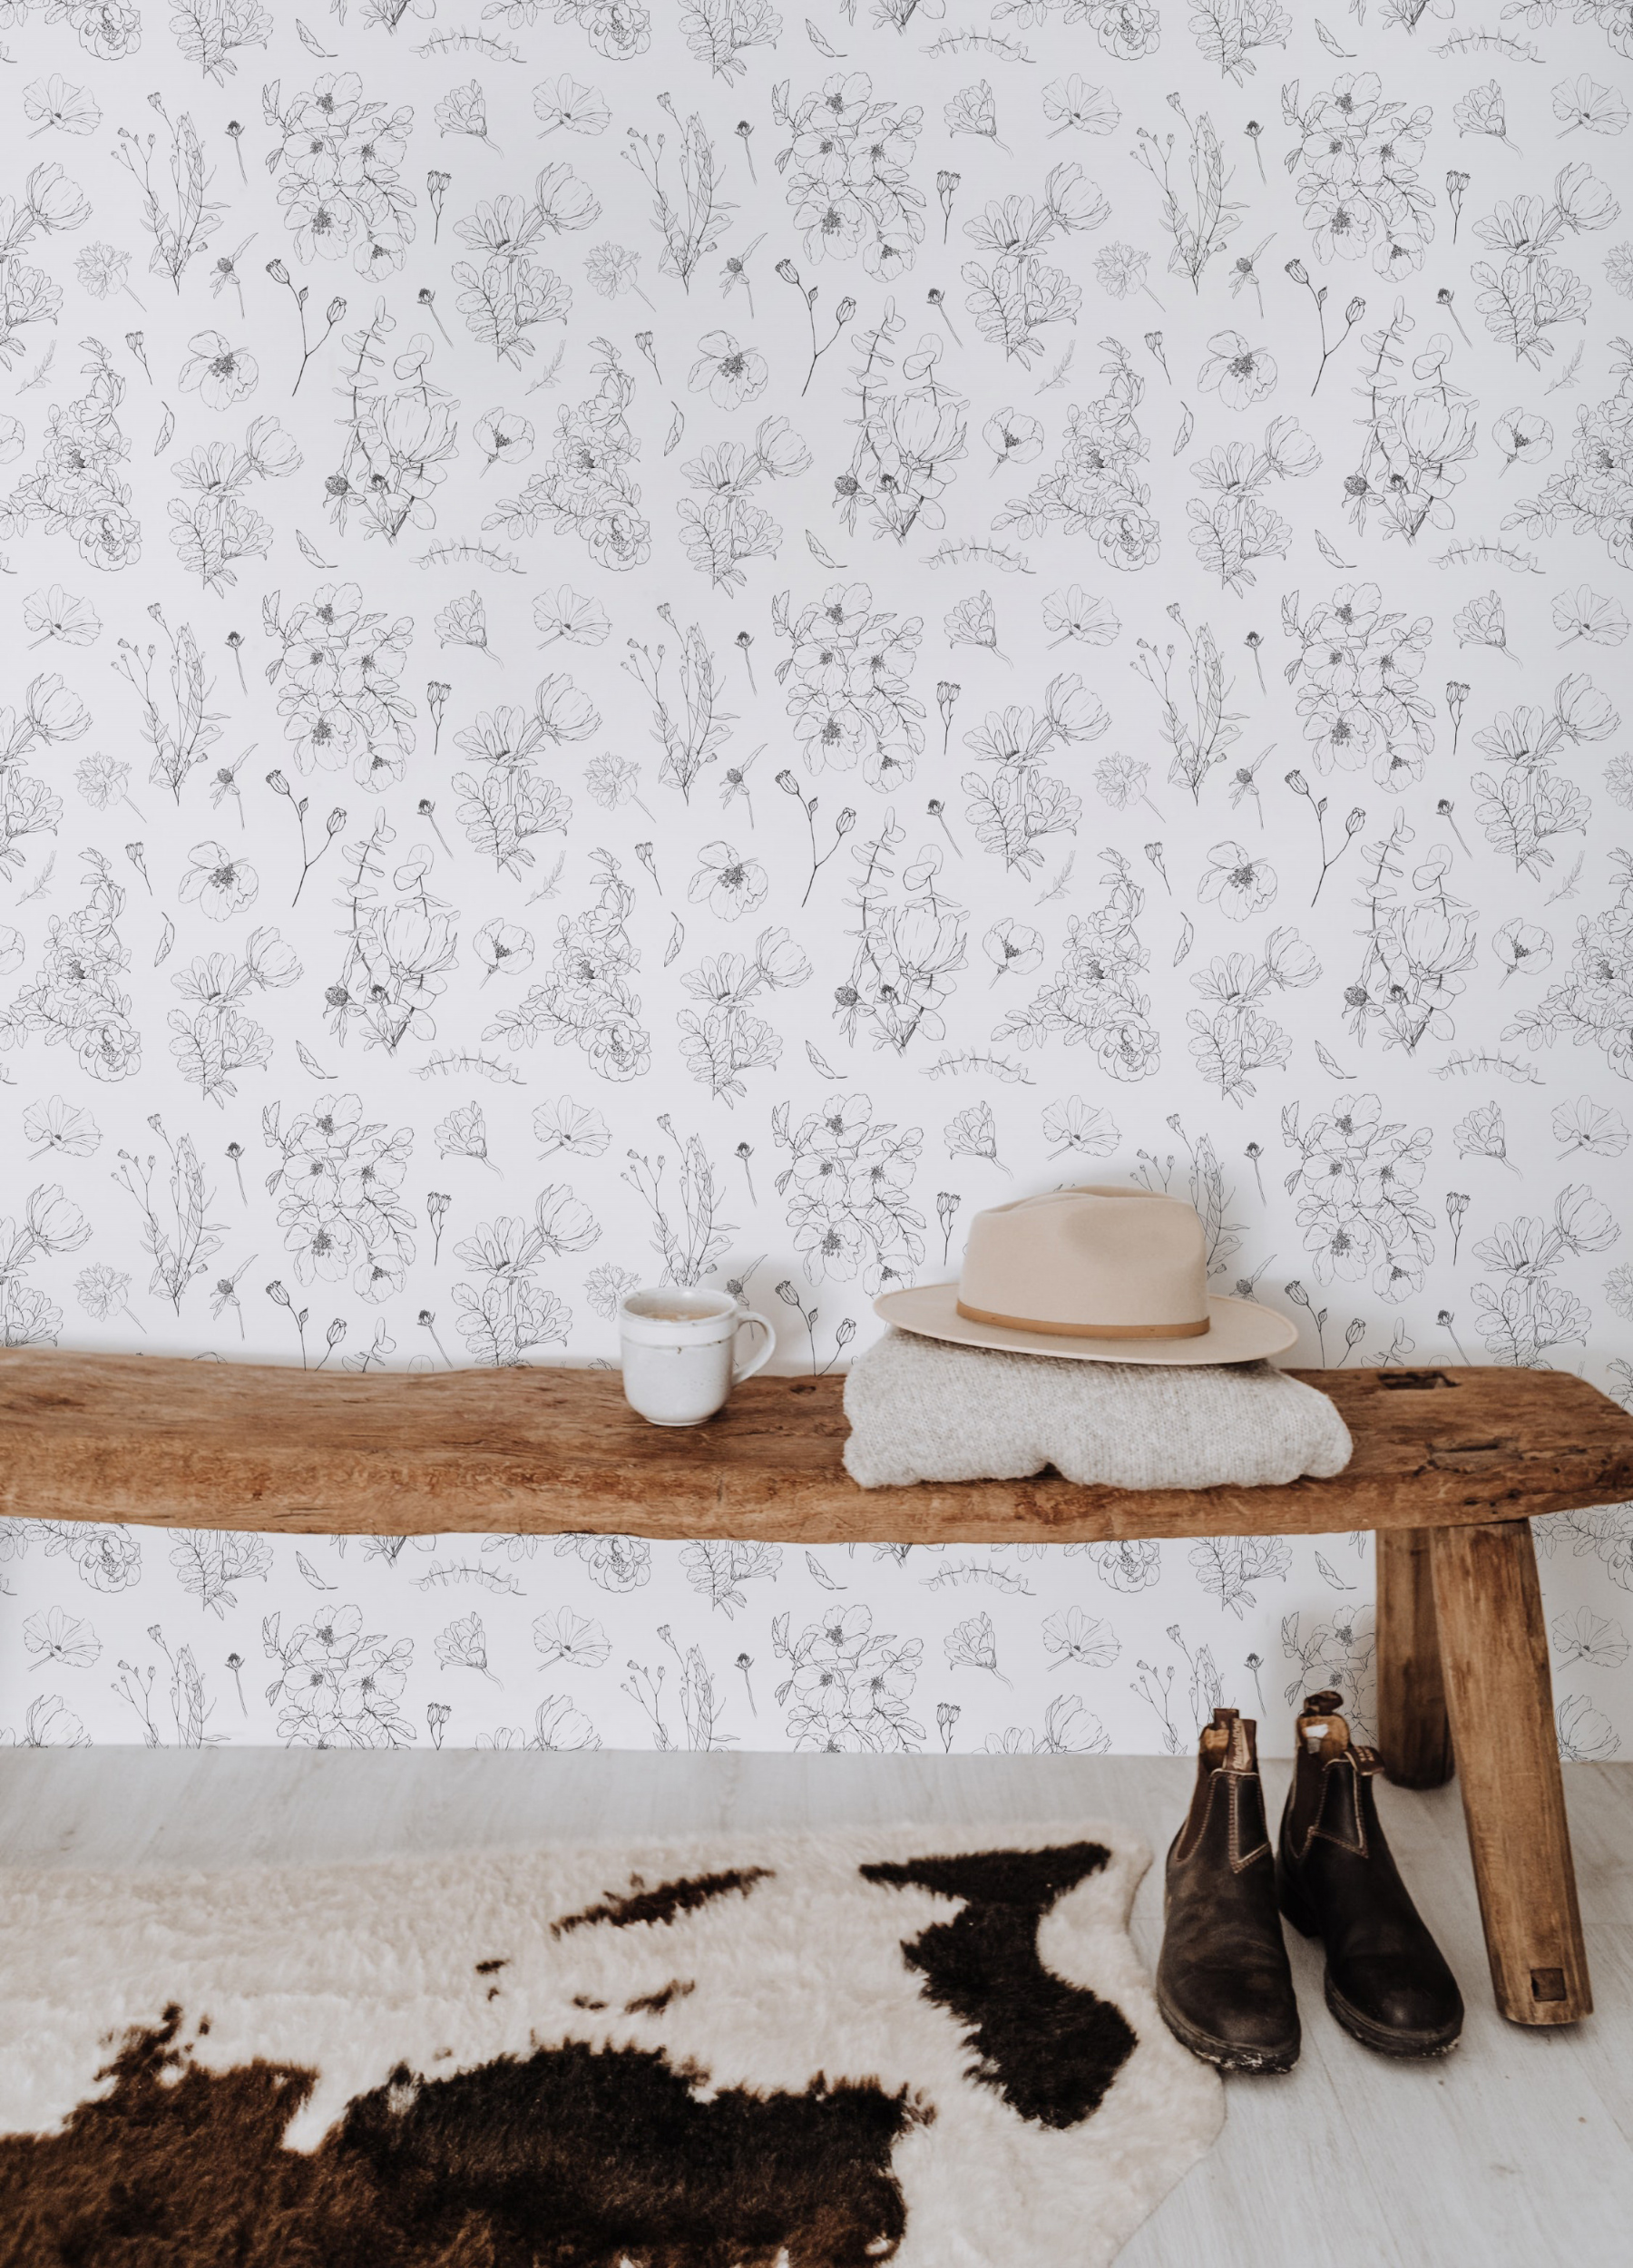 A rustic entryway bench made of a raw wooden plank set against a wall covered in Wildflower Sketch Wallpaper, which features intricate sketches of wildflowers on a white background. On the bench, there's a casual arrangement of a white ceramic mug, a beige felt hat, and a folded knit blanket, giving a sense of welcoming comfort. A pair of well-worn leather boots stands beside the bench on a cowhide rug, completing this homely scene.